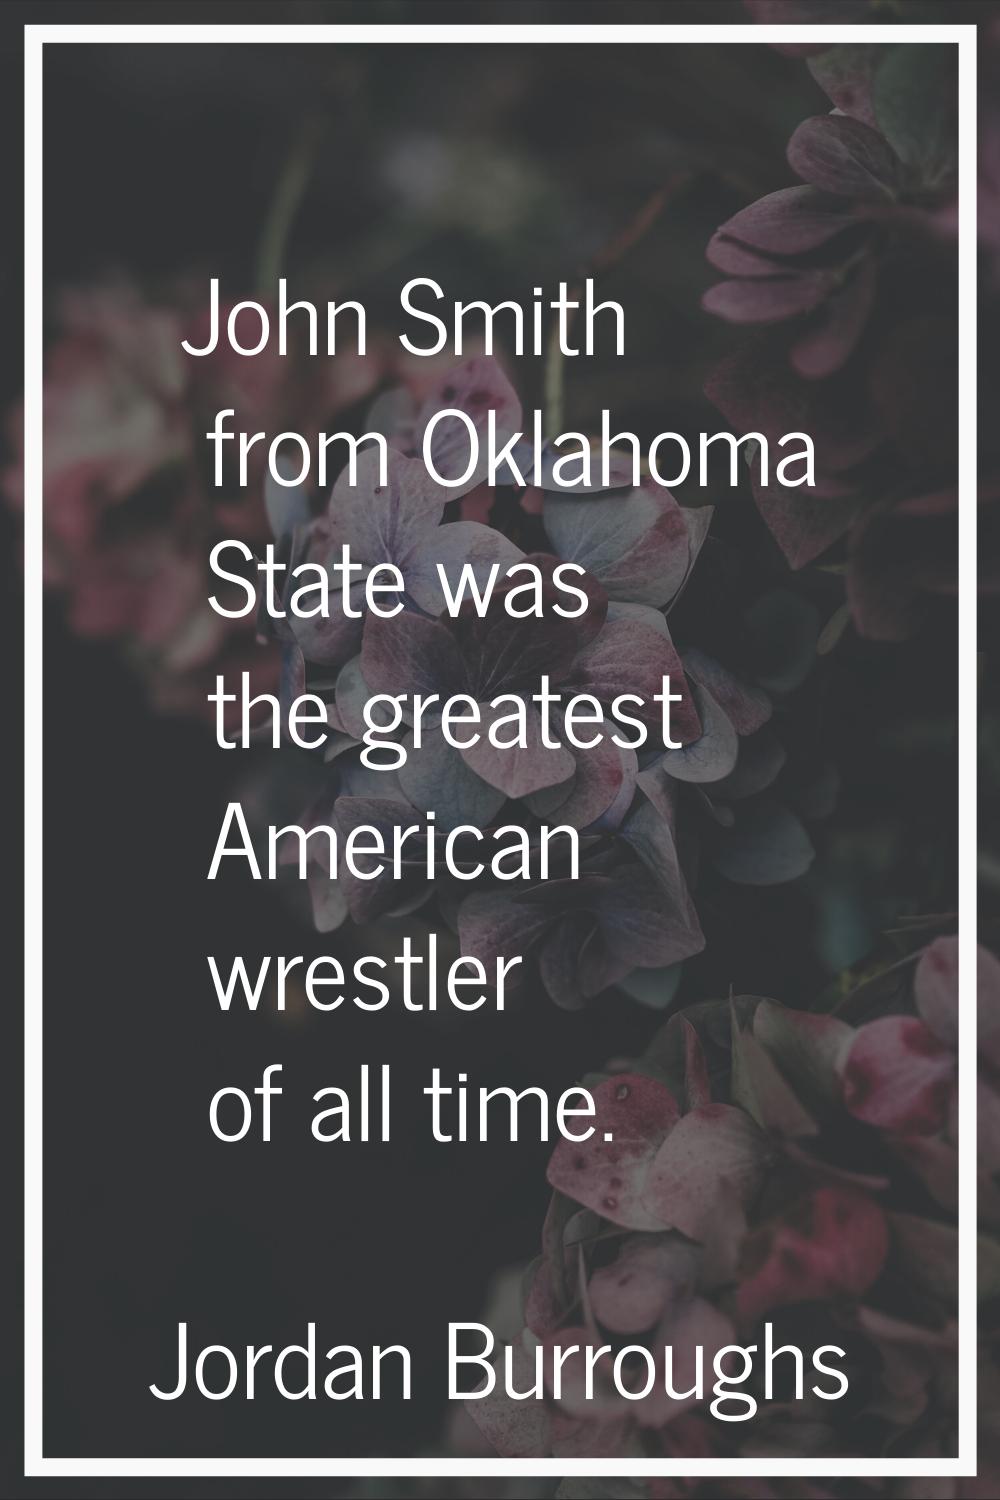 John Smith from Oklahoma State was the greatest American wrestler of all time.